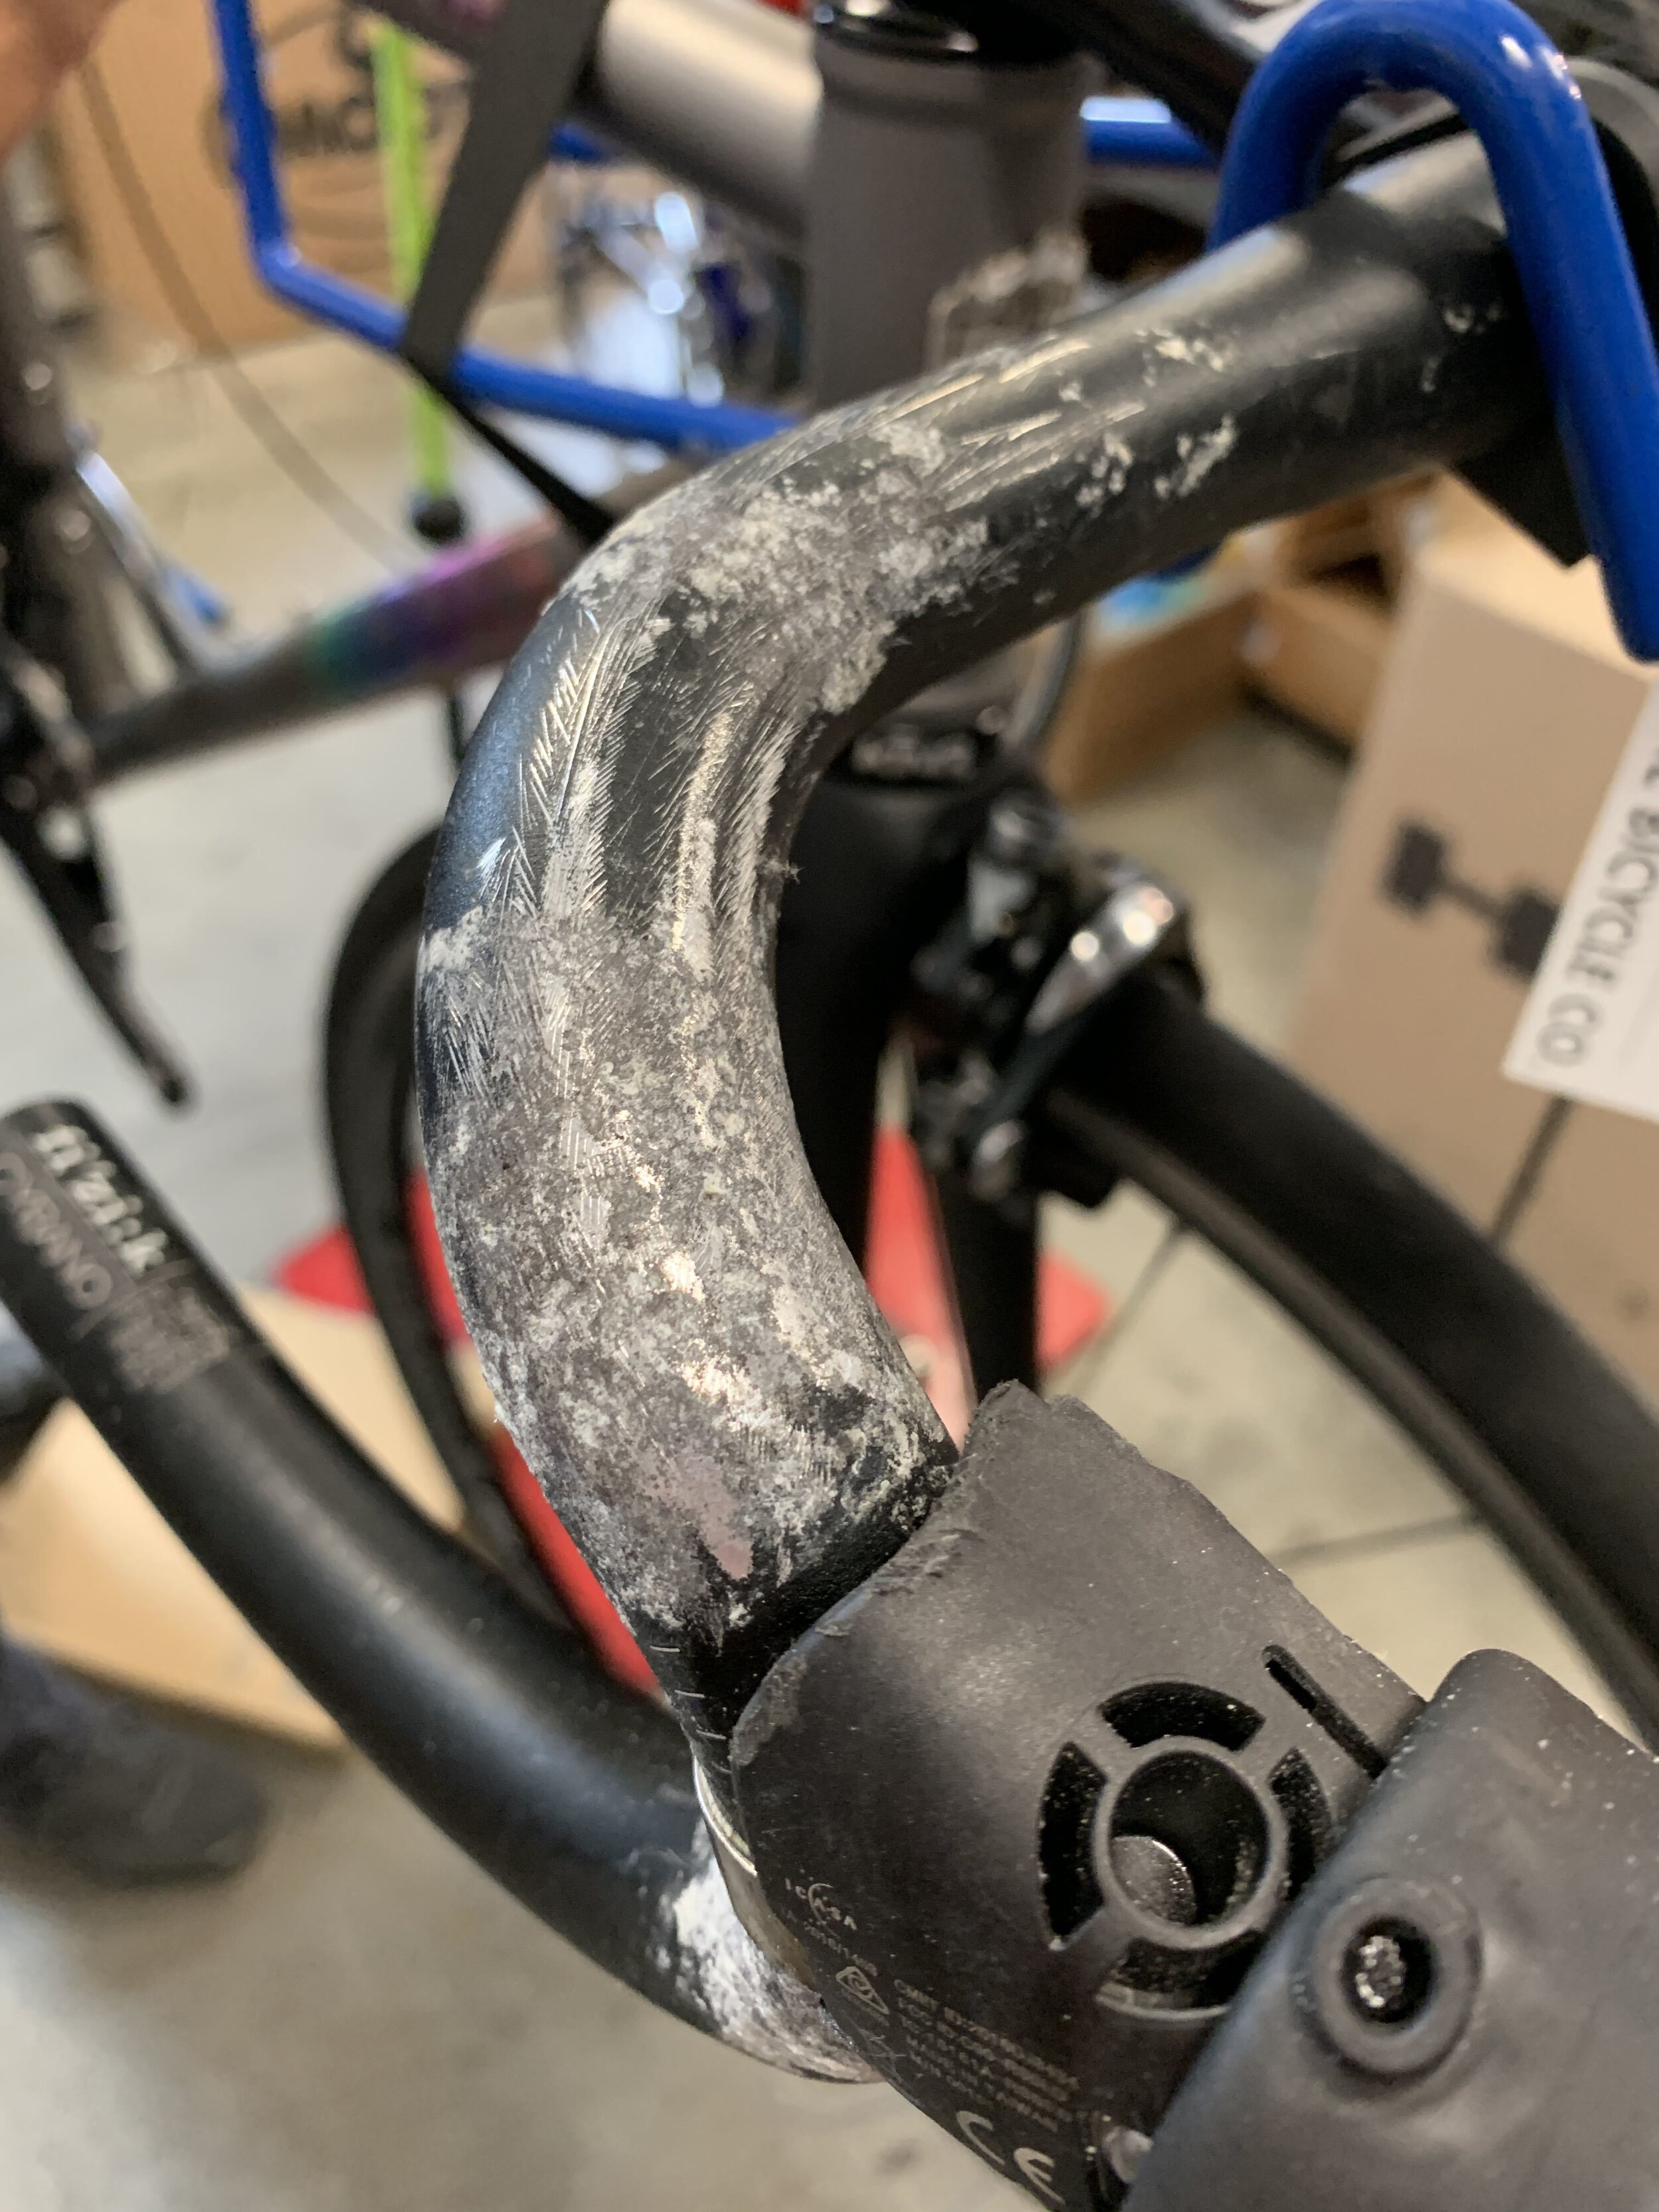 A particularly bad case of bar corrosion from team Zwift star Tom